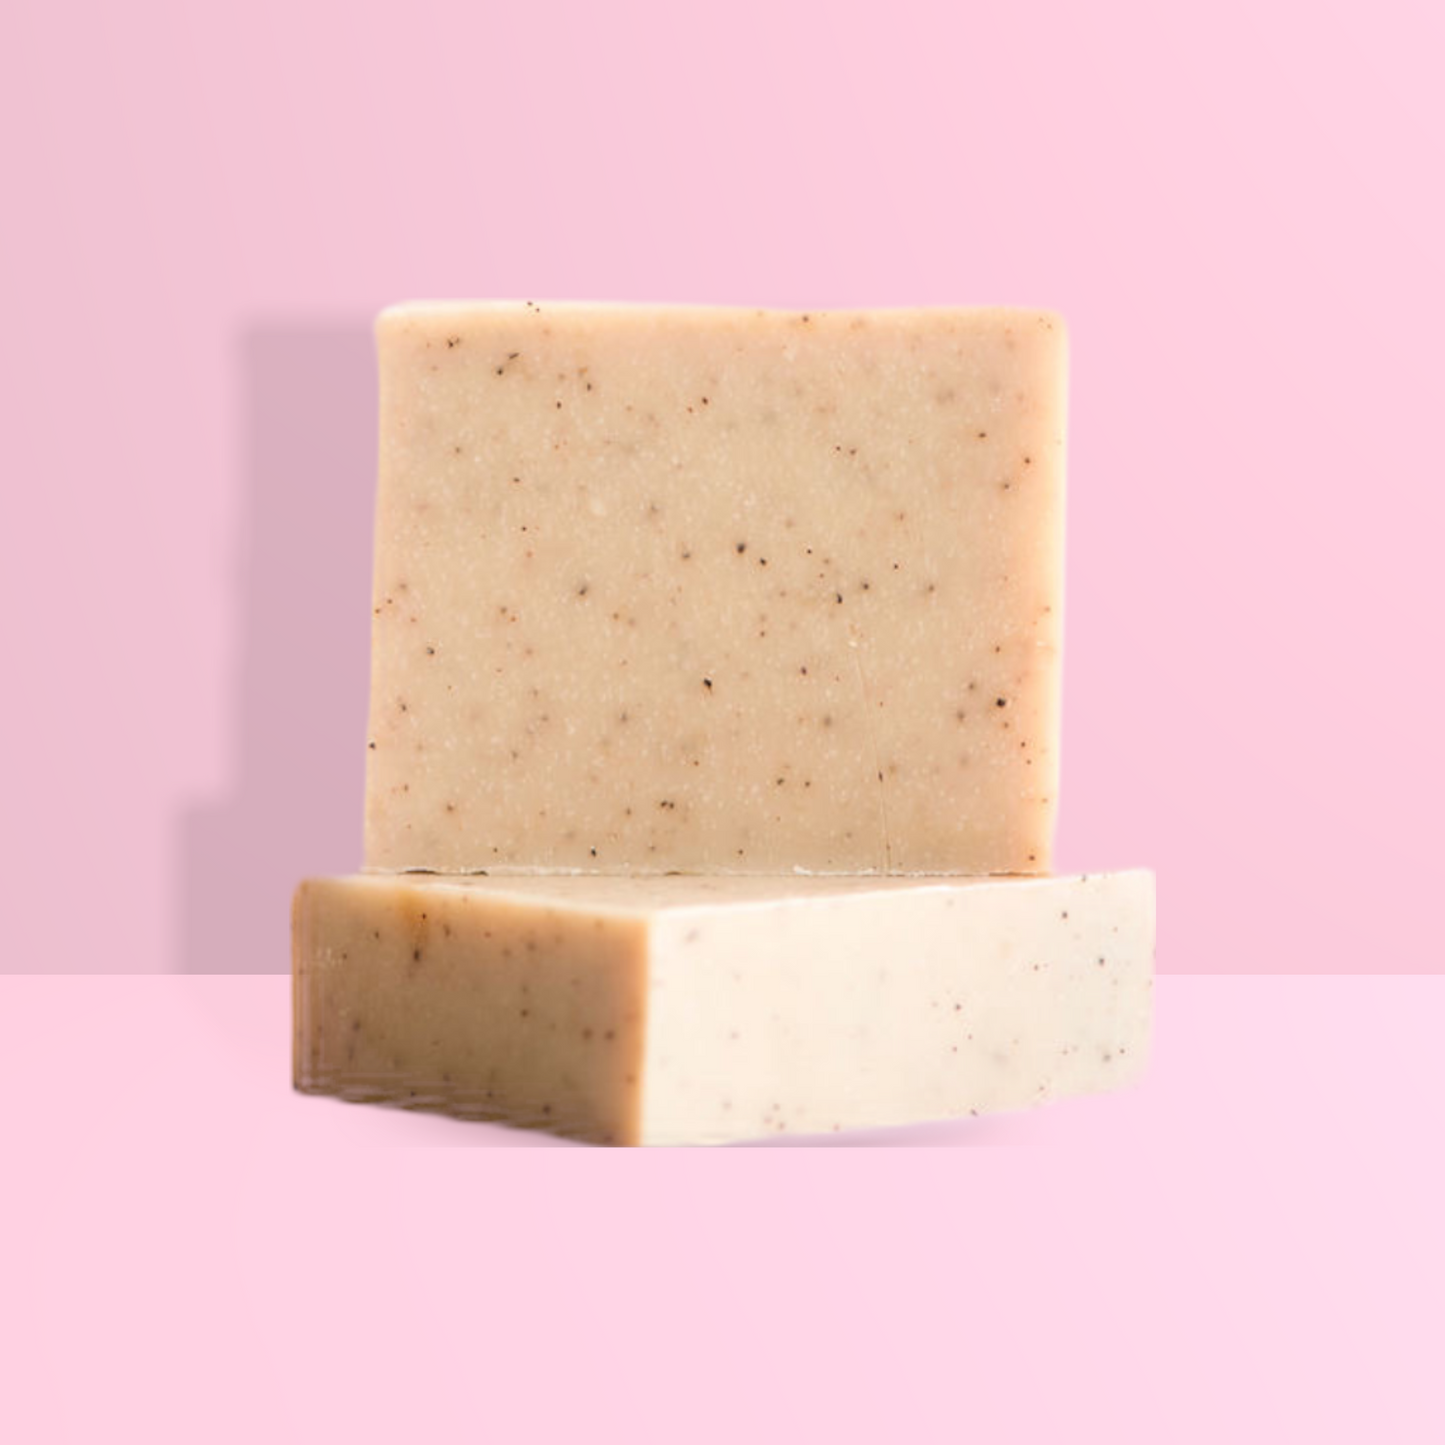 A close up view of Chai spice and cinnamon bar soap. 